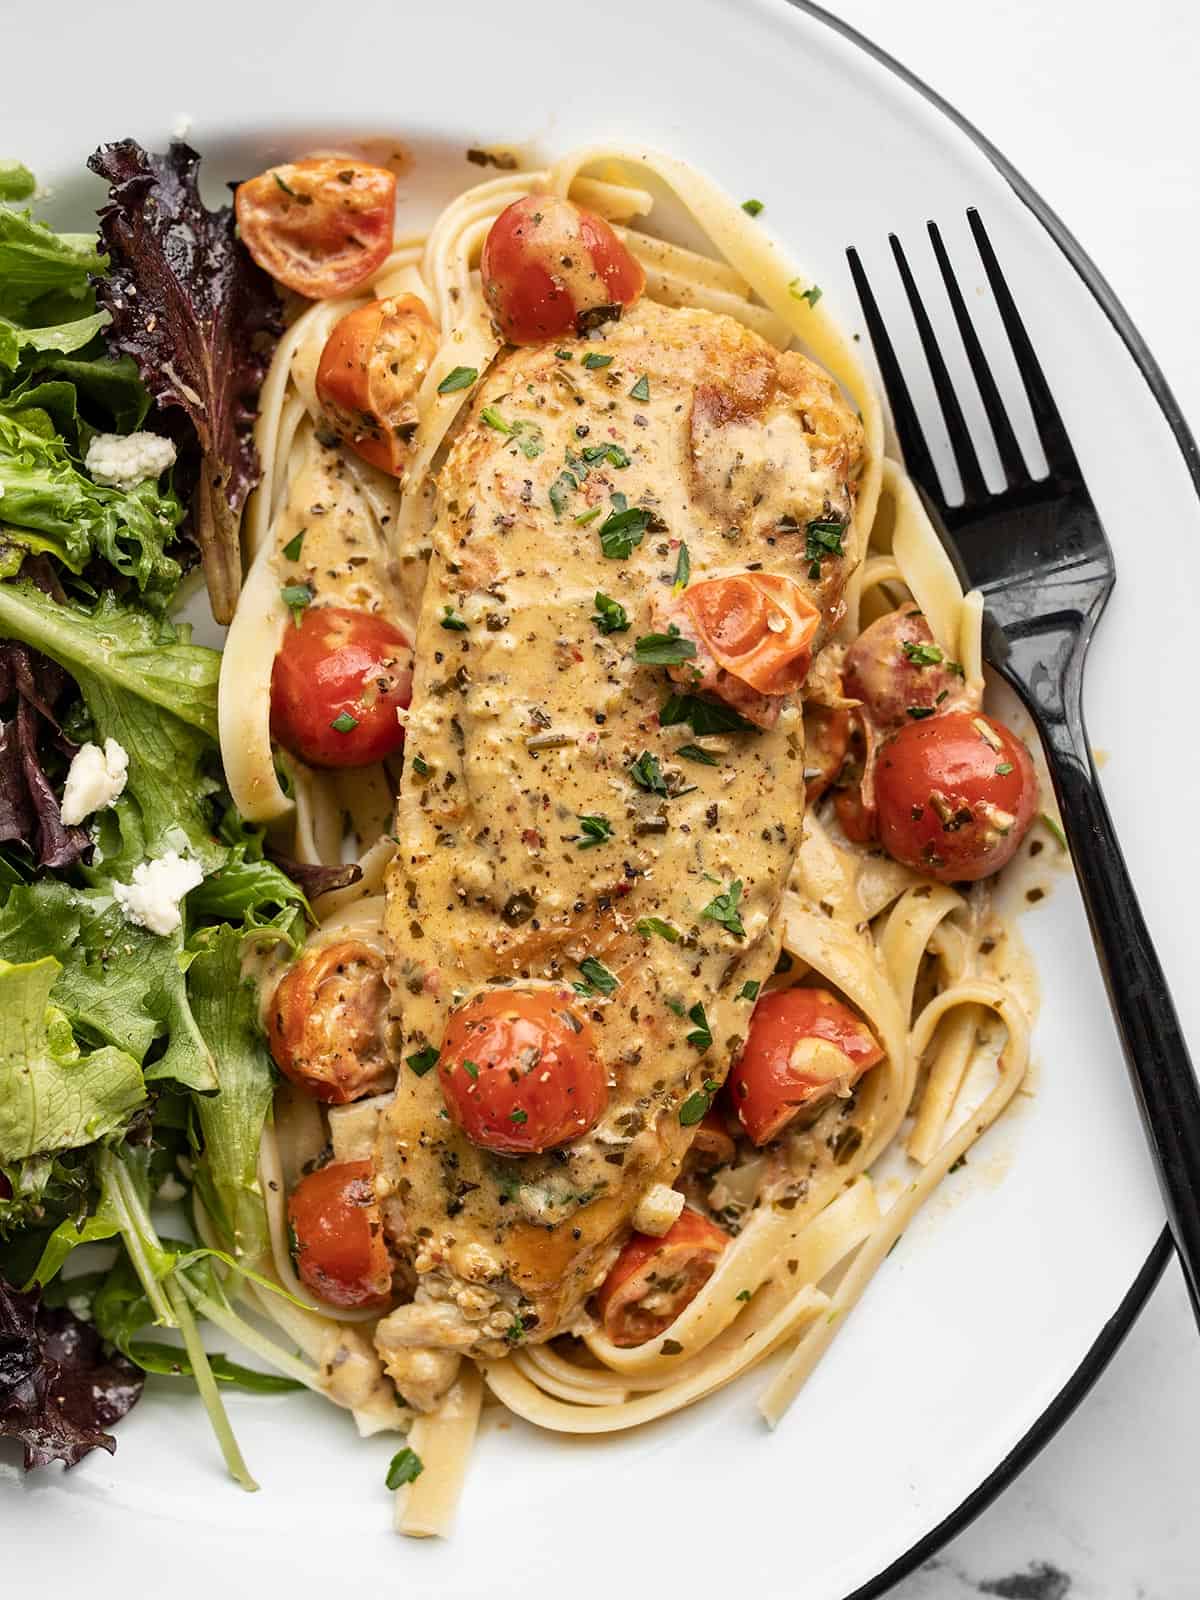 Creamy pesto chicken on a plate with pasta and a salad.